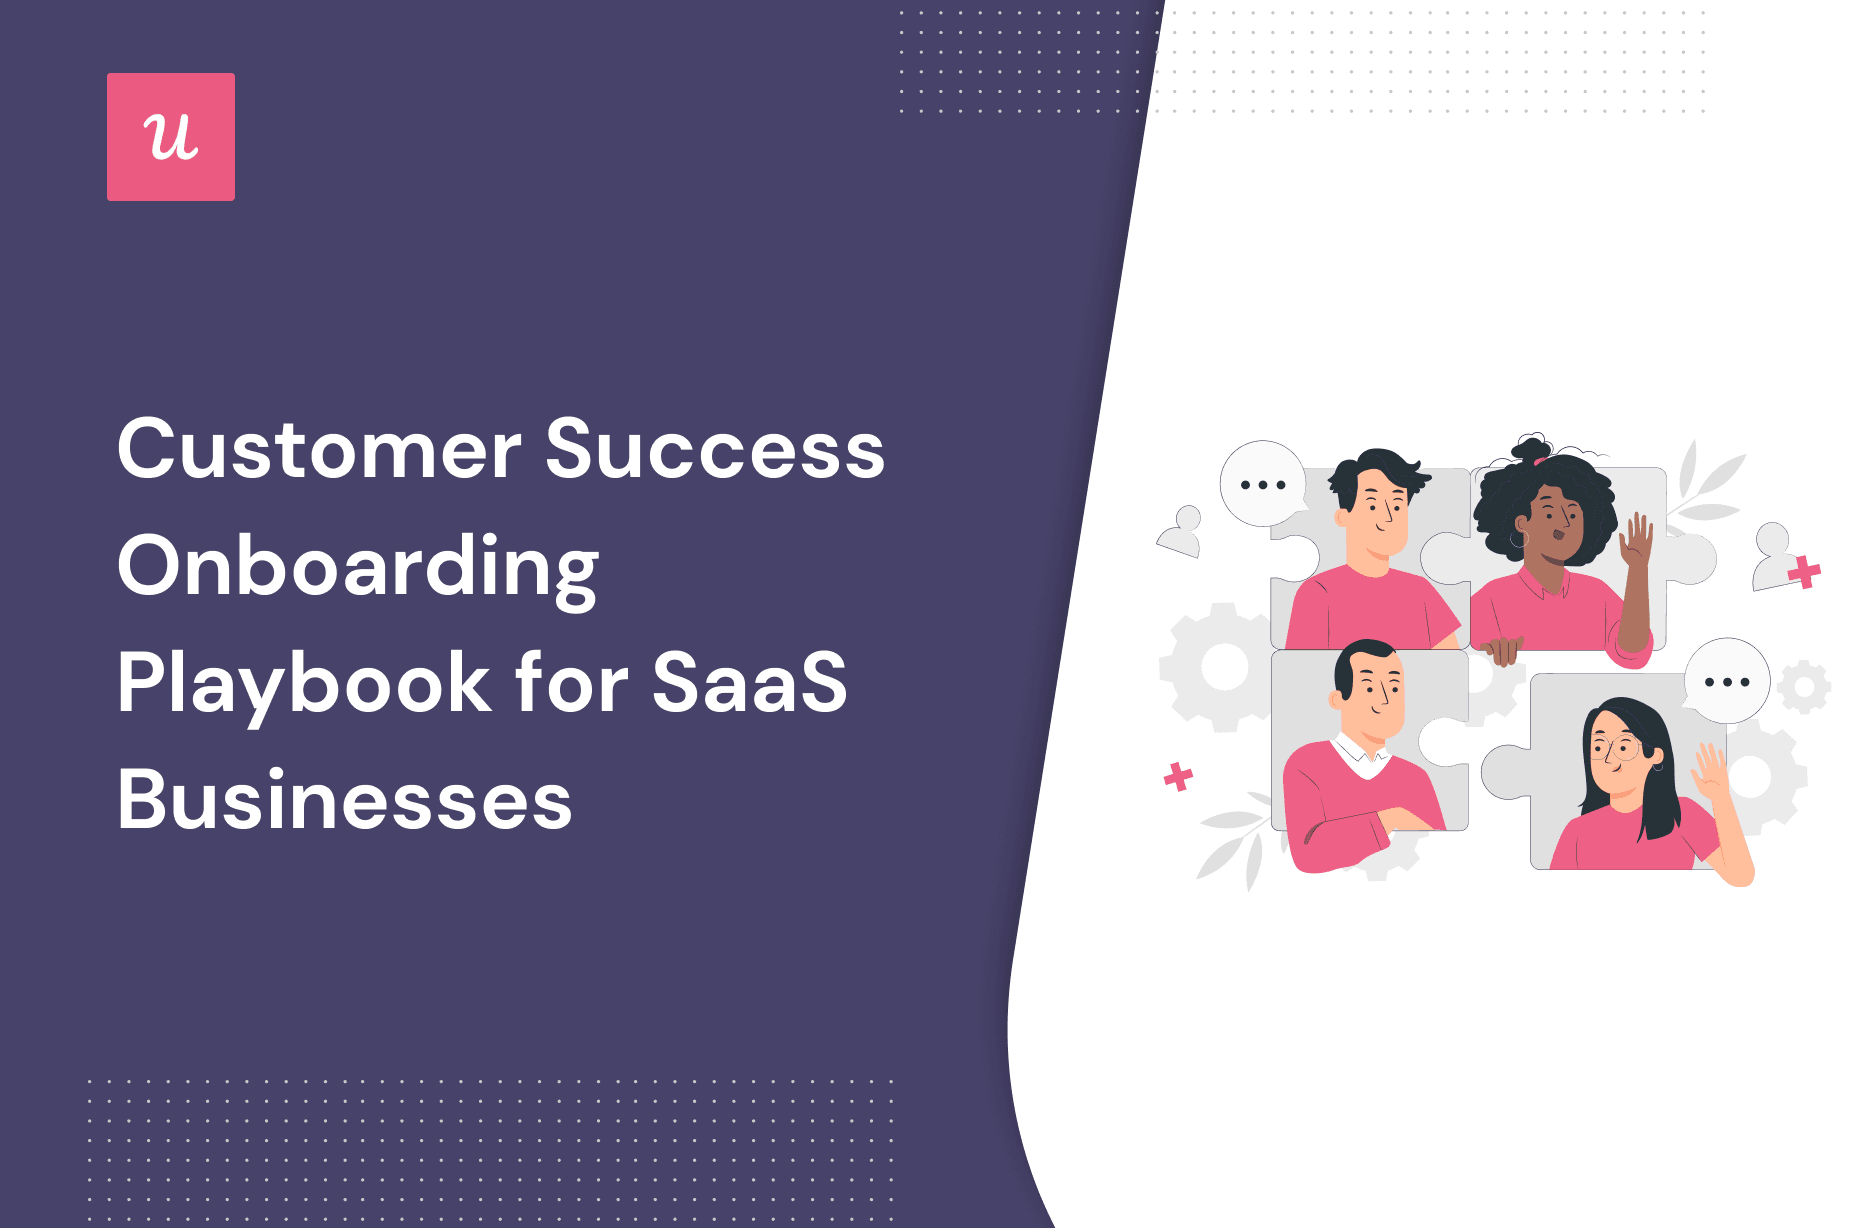 Customer Success Onboarding Playbook For SaaS Businesses